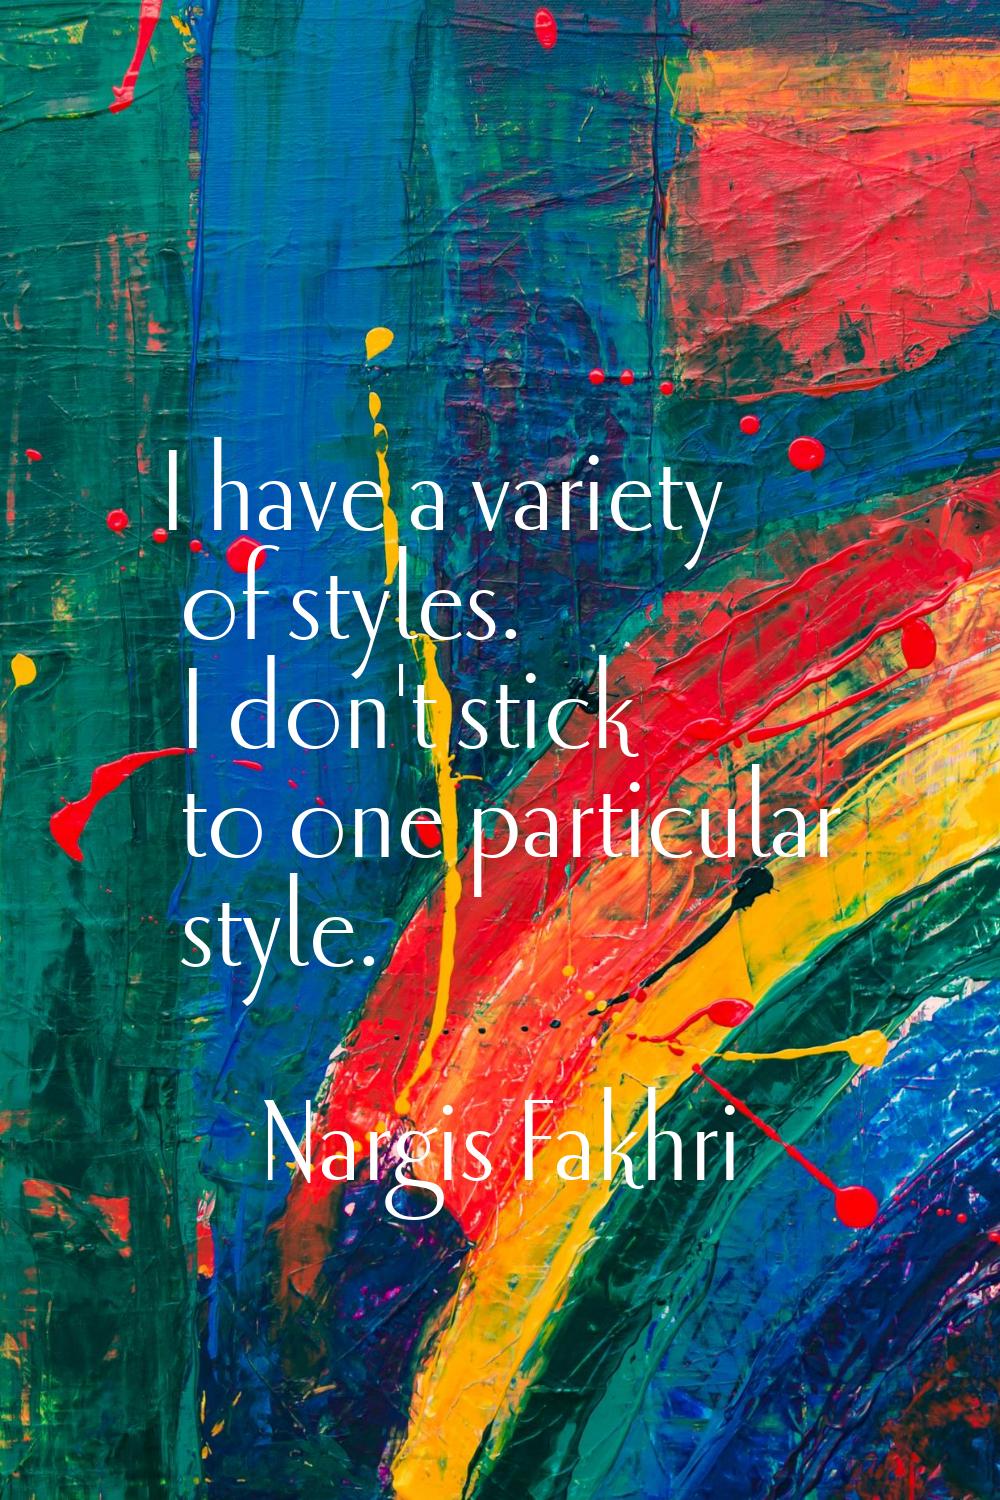 I have a variety of styles. I don't stick to one particular style.